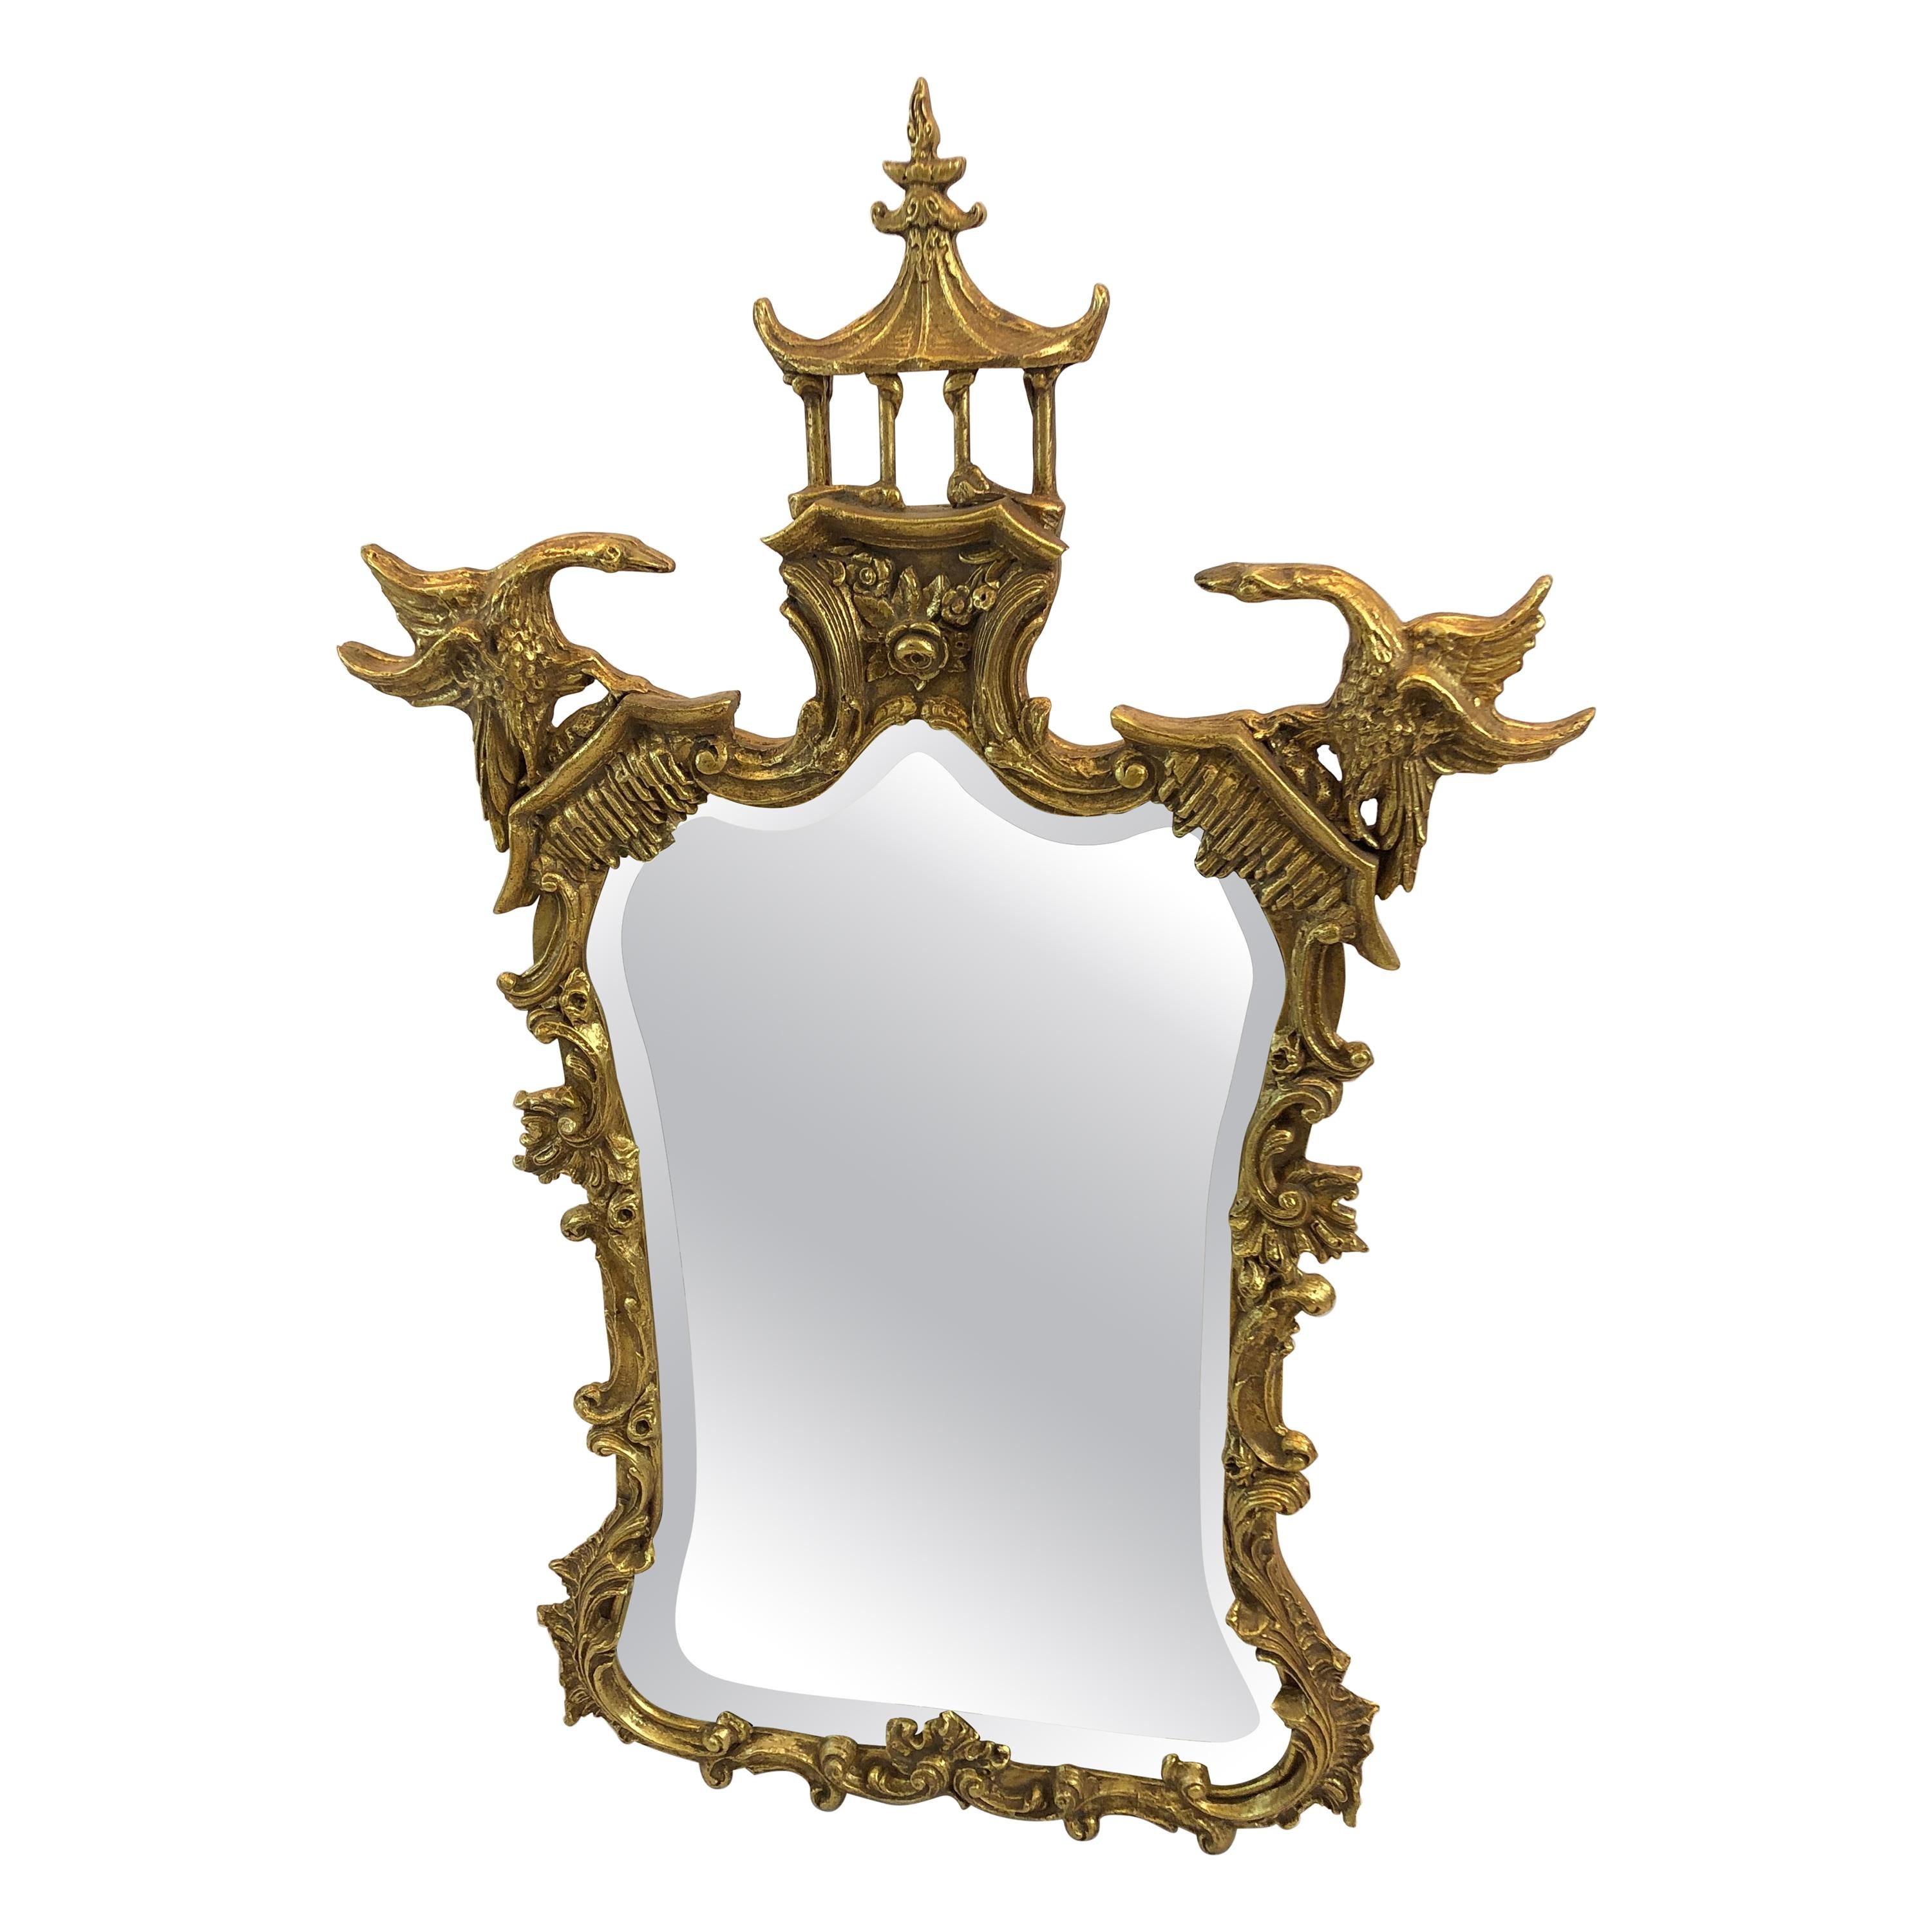 Beautiful Pagoda Asian Style Gold Leaf Mirror by Friedman Brothers